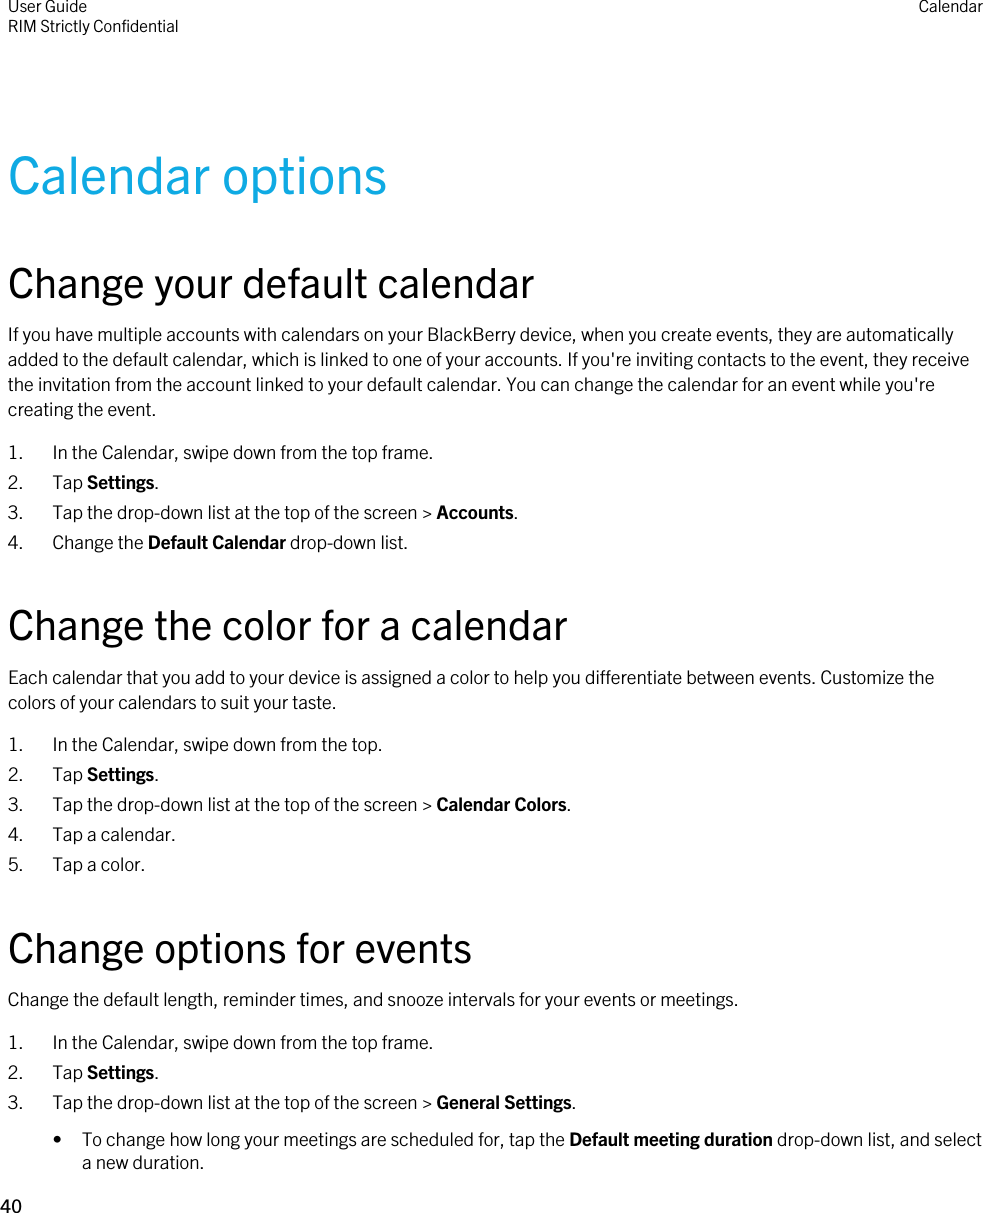 Calendar optionsChange your default calendarIf you have multiple accounts with calendars on your BlackBerry device, when you create events, they are automatically added to the default calendar, which is linked to one of your accounts. If you&apos;re inviting contacts to the event, they receive the invitation from the account linked to your default calendar. You can change the calendar for an event while you&apos;re creating the event.1. In the Calendar, swipe down from the top frame.2. Tap Settings.3. Tap the drop-down list at the top of the screen &gt; Accounts.4. Change the Default Calendar drop-down list.Change the color for a calendarEach calendar that you add to your device is assigned a color to help you differentiate between events. Customize the colors of your calendars to suit your taste.1. In the Calendar, swipe down from the top.2. Tap Settings.3. Tap the drop-down list at the top of the screen &gt; Calendar Colors.4. Tap a calendar.5. Tap a color.Change options for eventsChange the default length, reminder times, and snooze intervals for your events or meetings.1. In the Calendar, swipe down from the top frame.2. Tap Settings.3. Tap the drop-down list at the top of the screen &gt; General Settings.• To change how long your meetings are scheduled for, tap the Default meeting duration drop-down list, and select a new duration.User GuideRIM Strictly Confidential Calendar40 